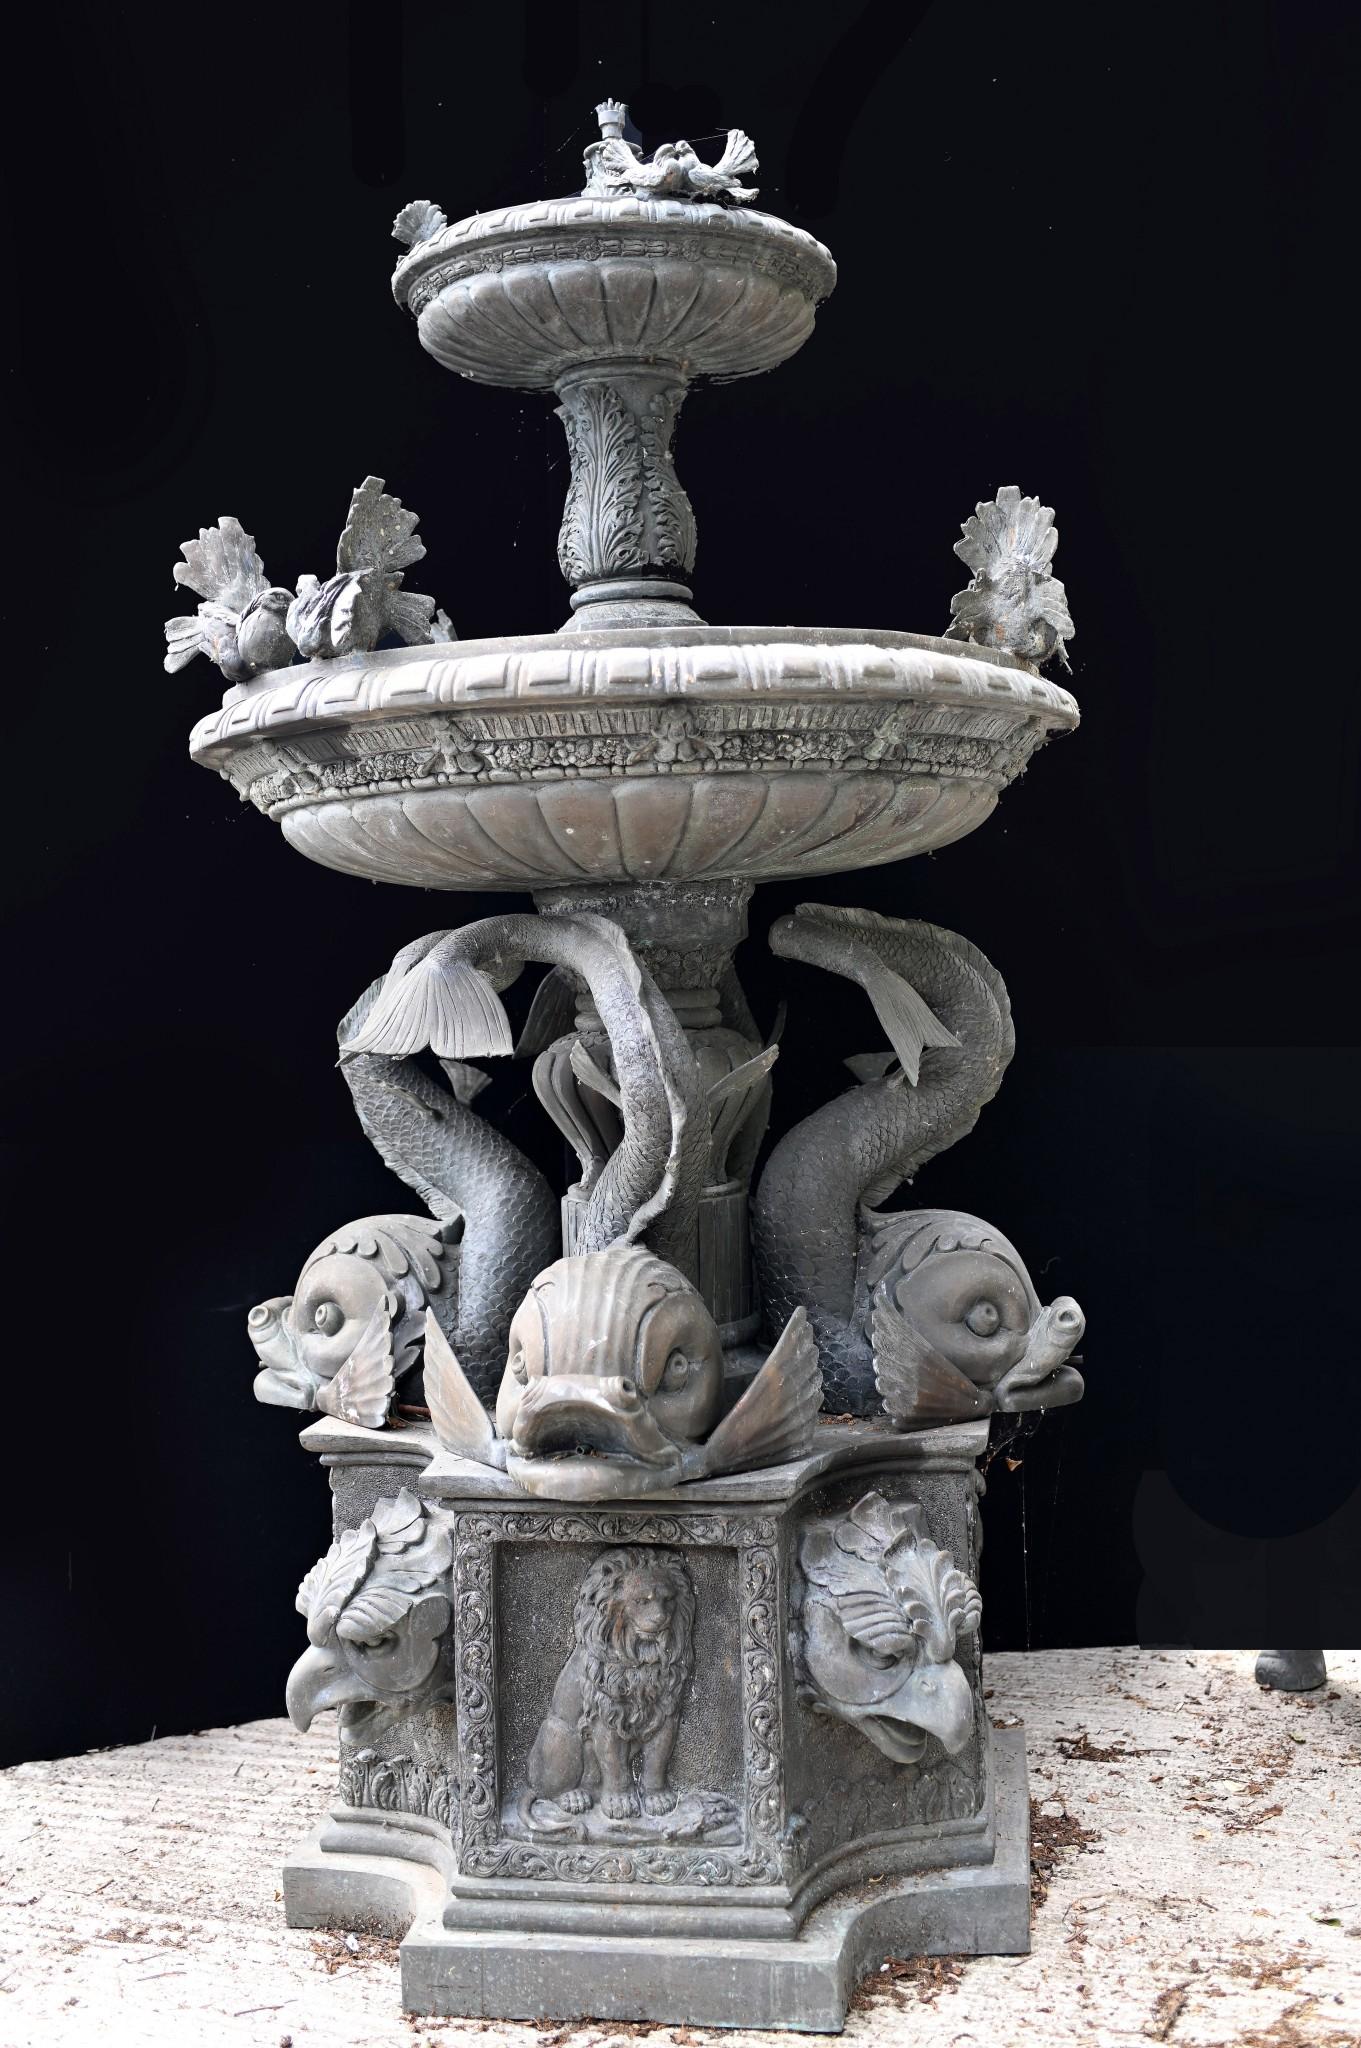 Stunning Italian antique garden fountain in bronze
Great work of classical beauty with main column supported by sea serpents
Believed to be salvaged from a town near Trieste in Italy
Two tiers to the fountain with birds on the rim
Also features